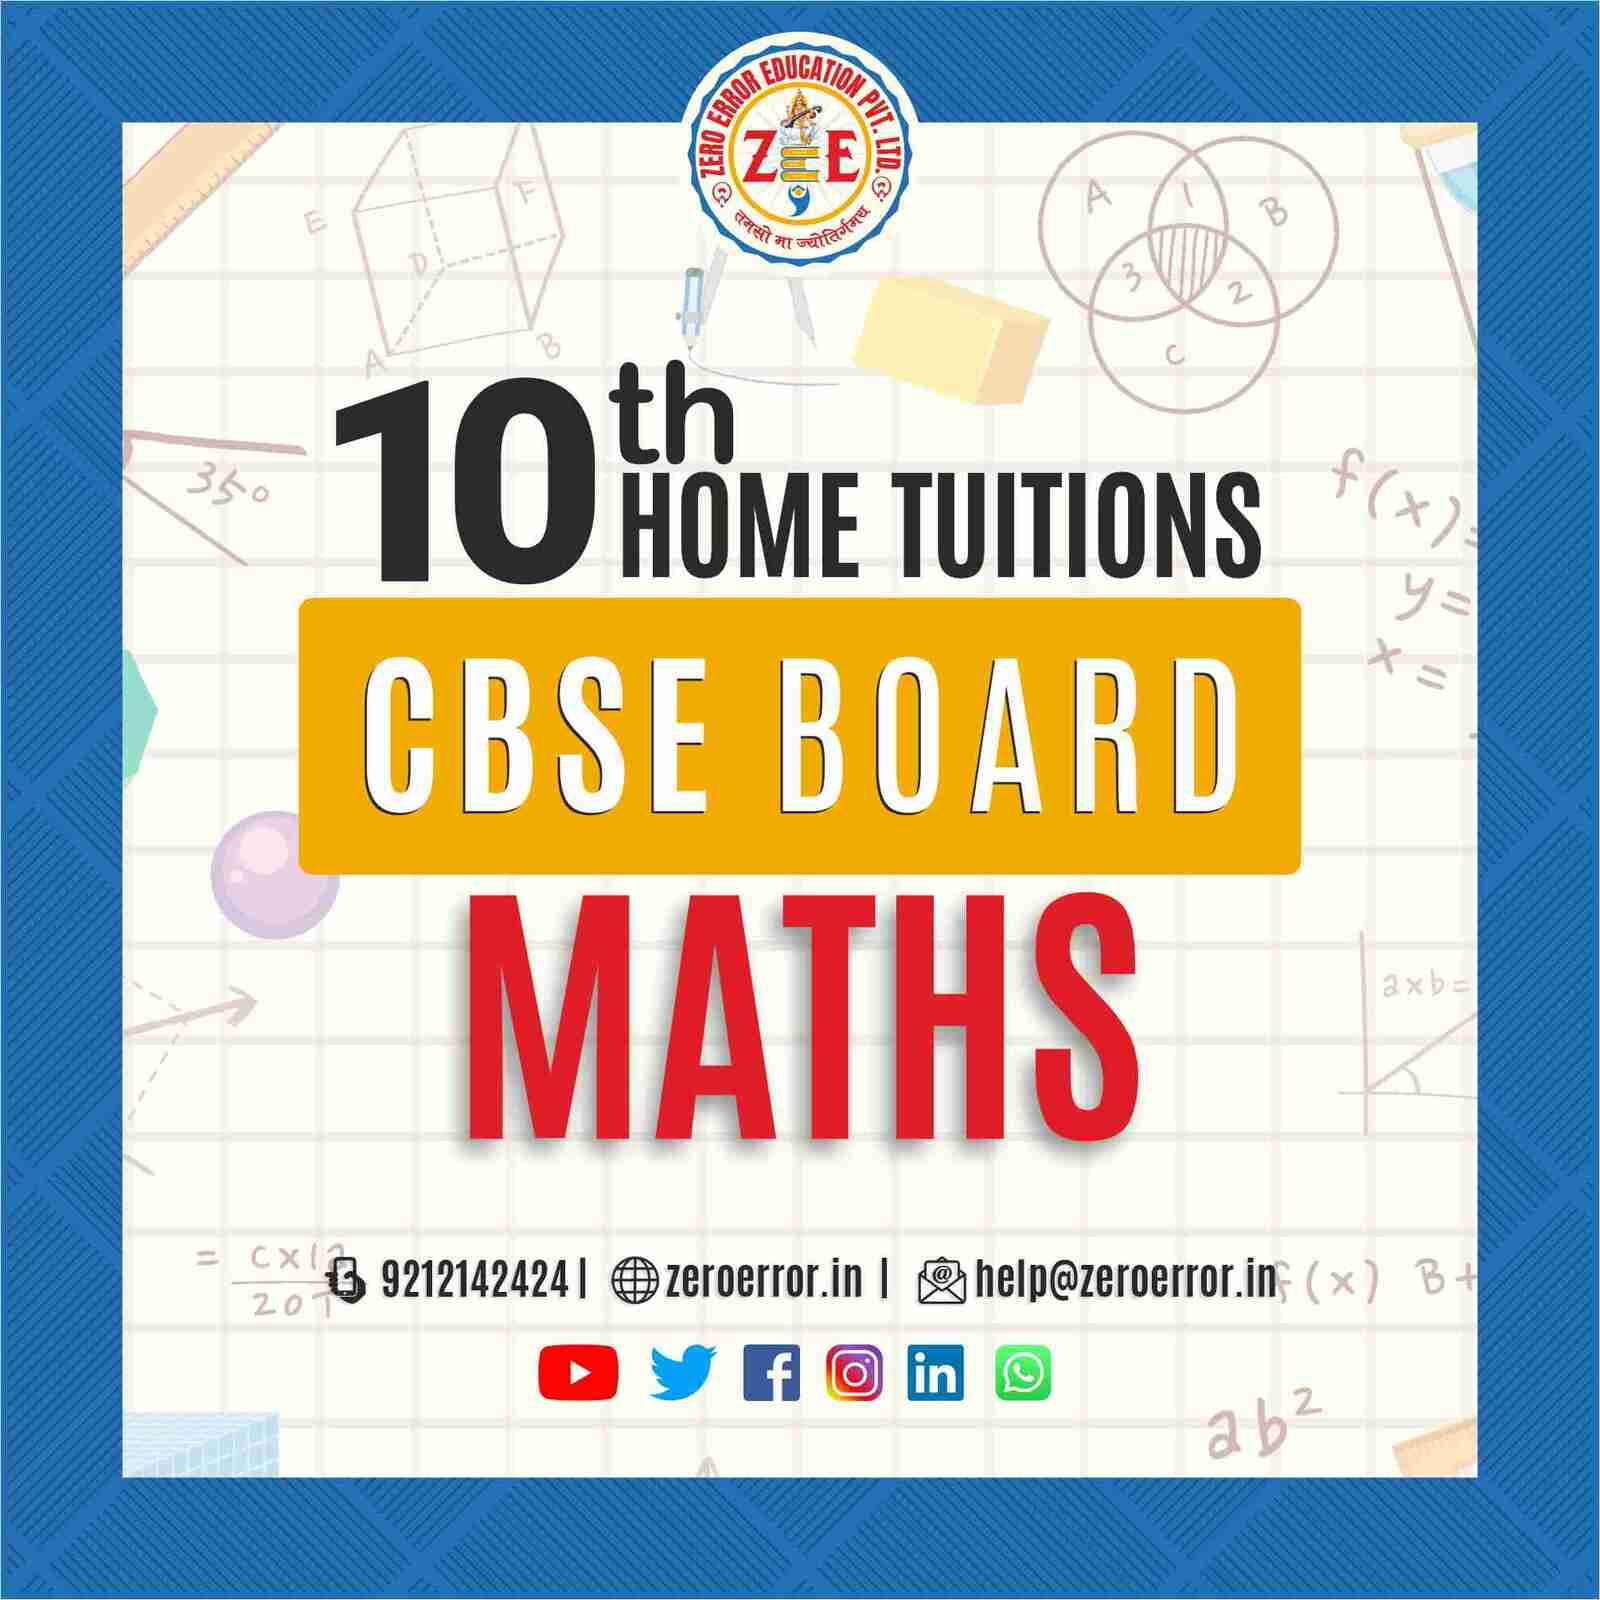 10th Grade CBSE Math's Online Classes by Zero Error Education Prepare for your CBSE board exams with online and offline Math's classes for 10th grade. Learn from experienced home tutors and get all the help you need to succeed. Enroll today at Zero Error Education. [https://zeroerror.in/] Call 9212142424 for more information.